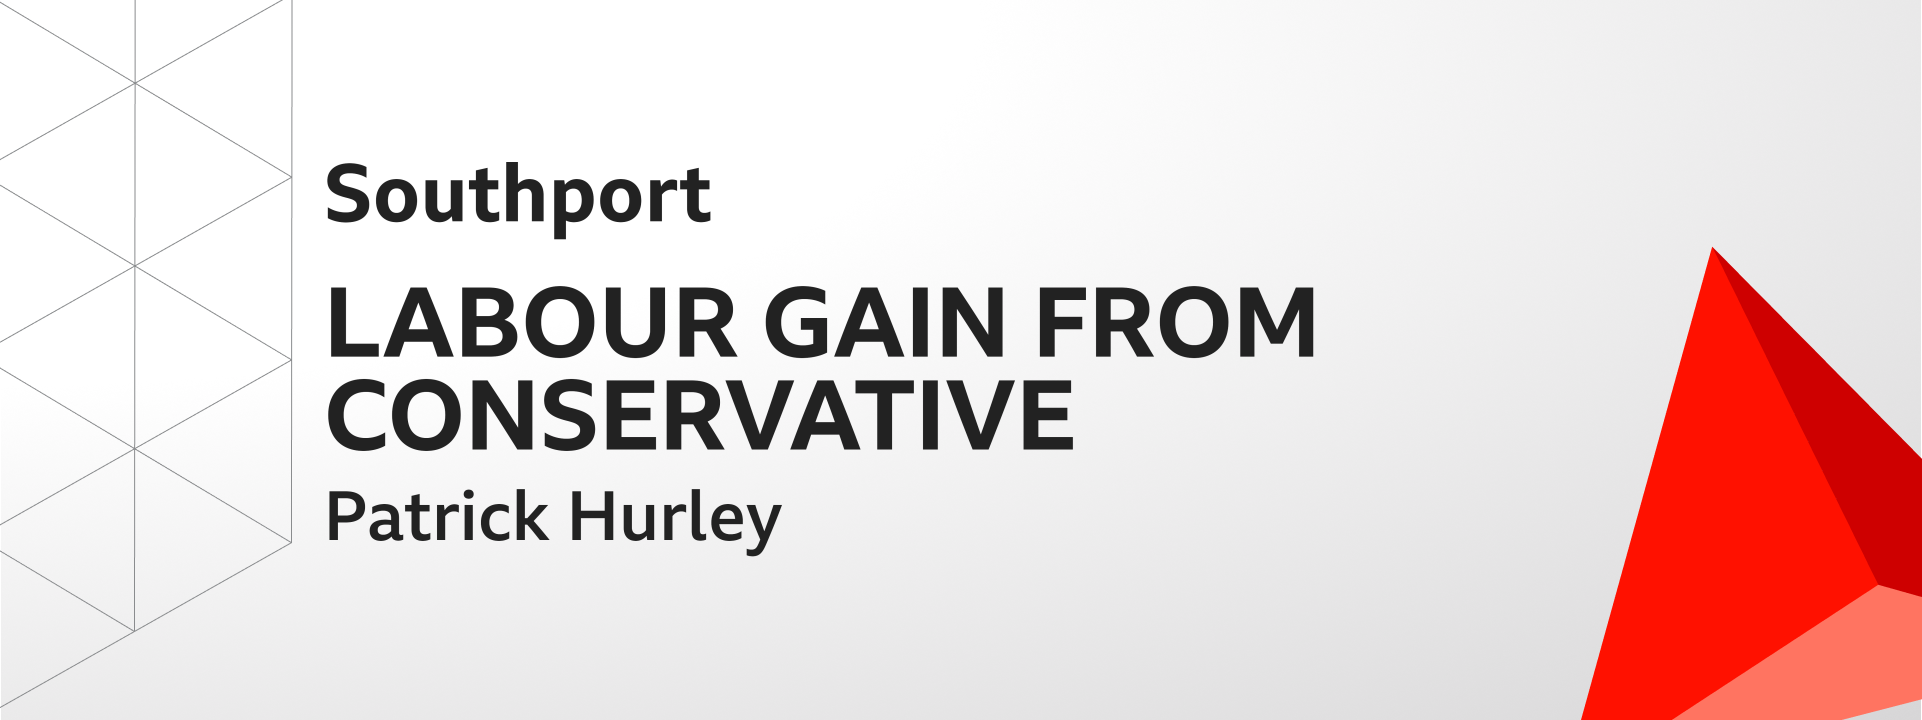 Graphic showing Labour gains Southport from the Conservatives. The winning candidate was Patrick Hurley.